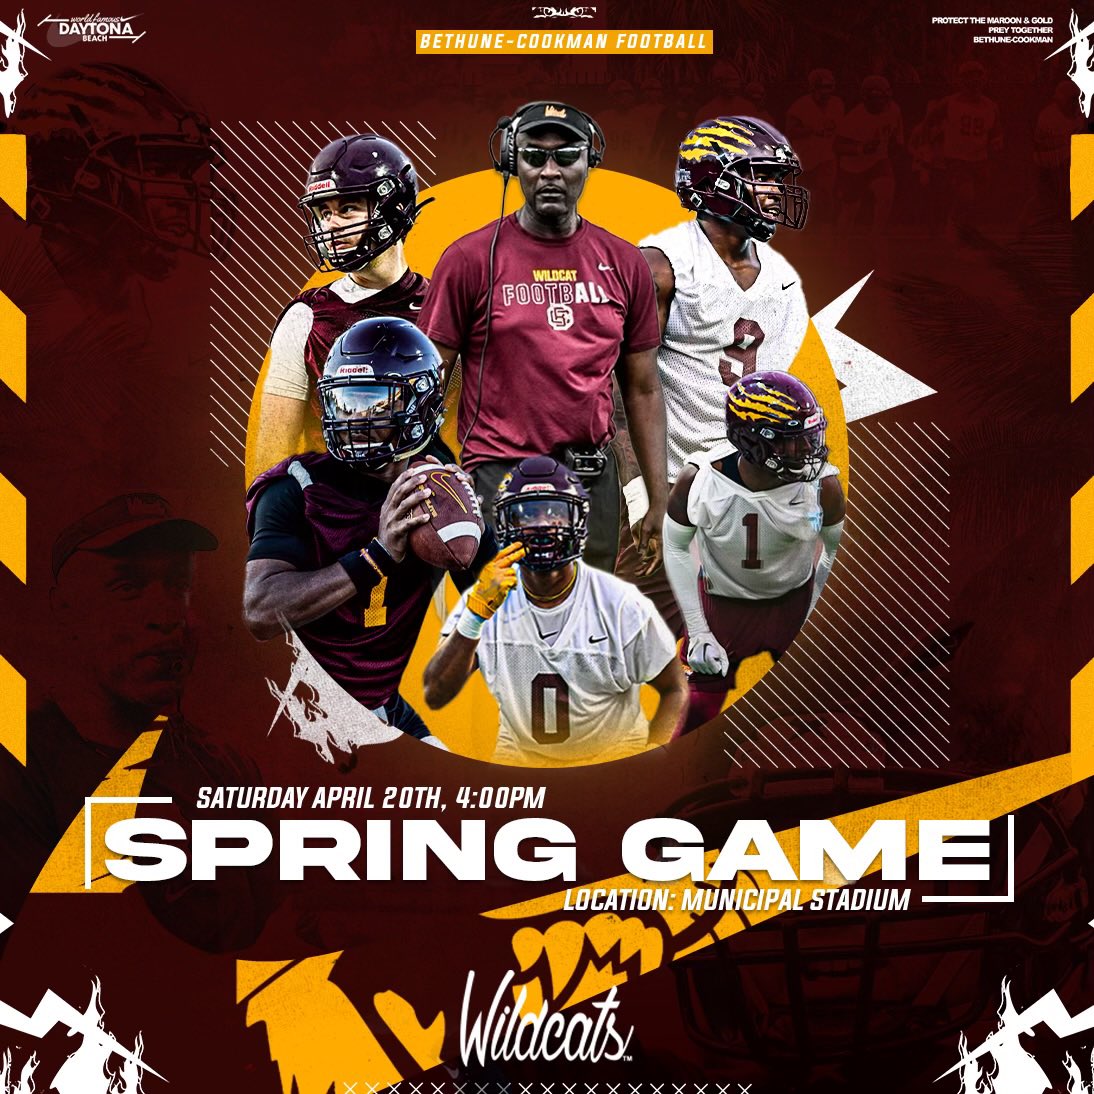 Wildcat Football is back April 20th 🏈🏝️ #Hailwildcats